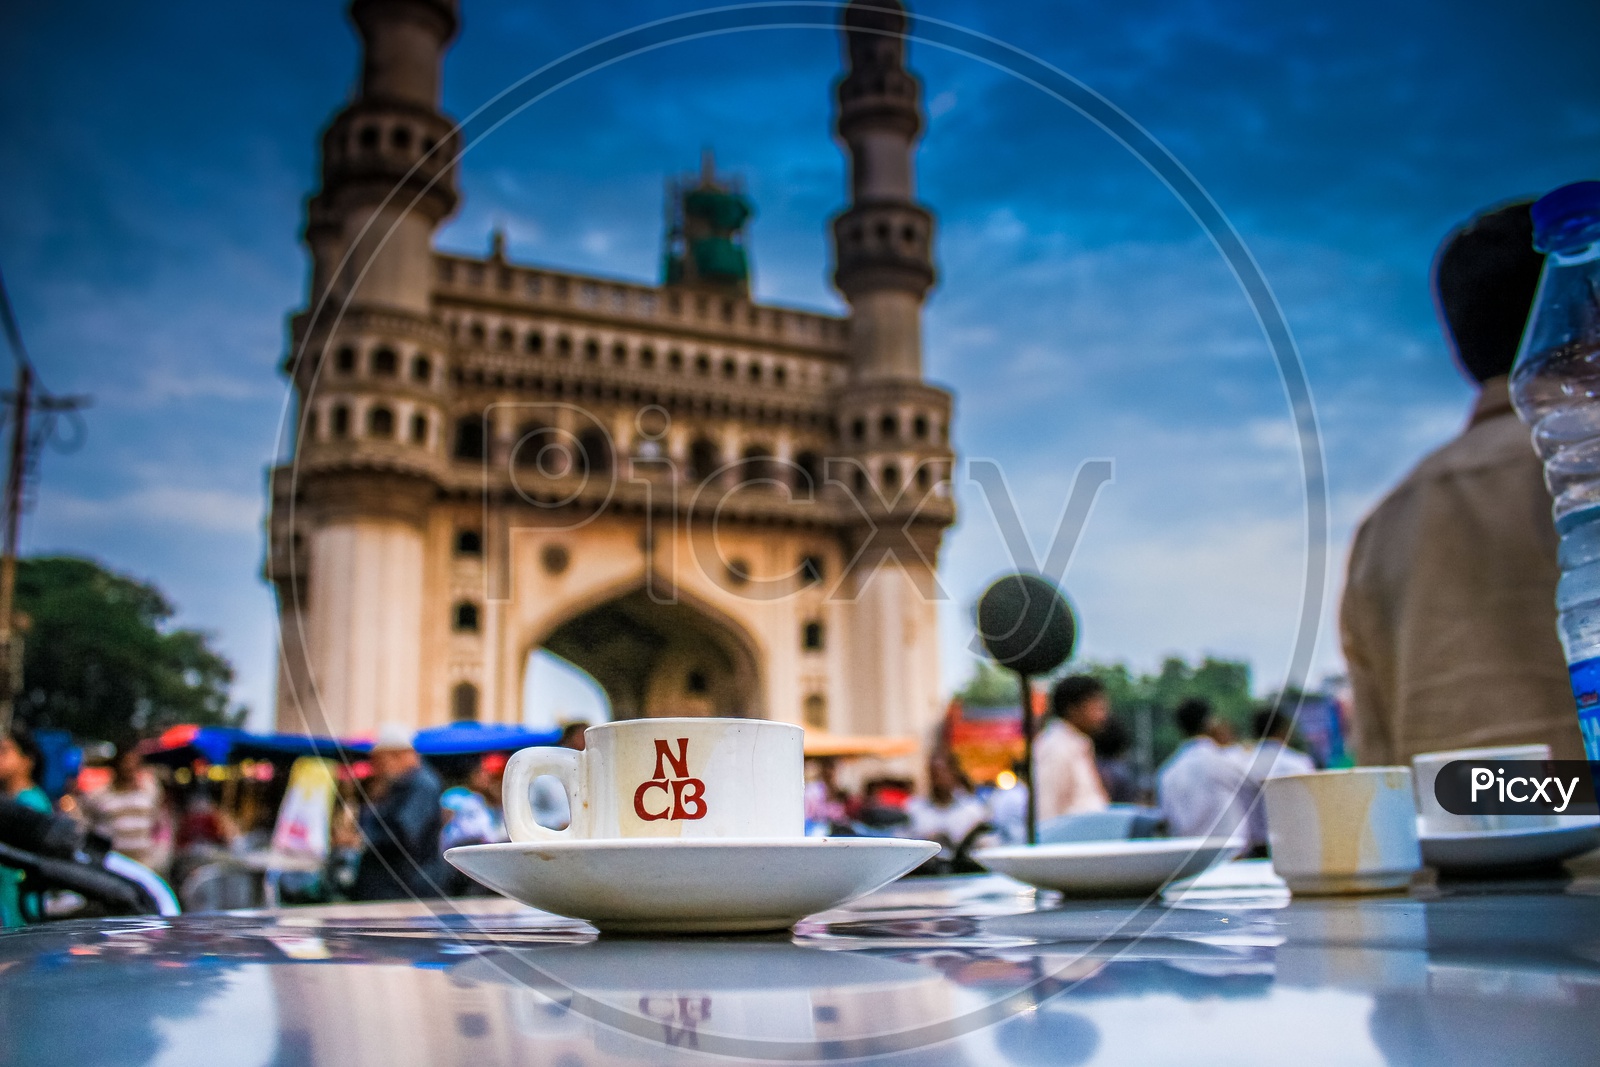 Tea cup in a saucer with Charminar in the background